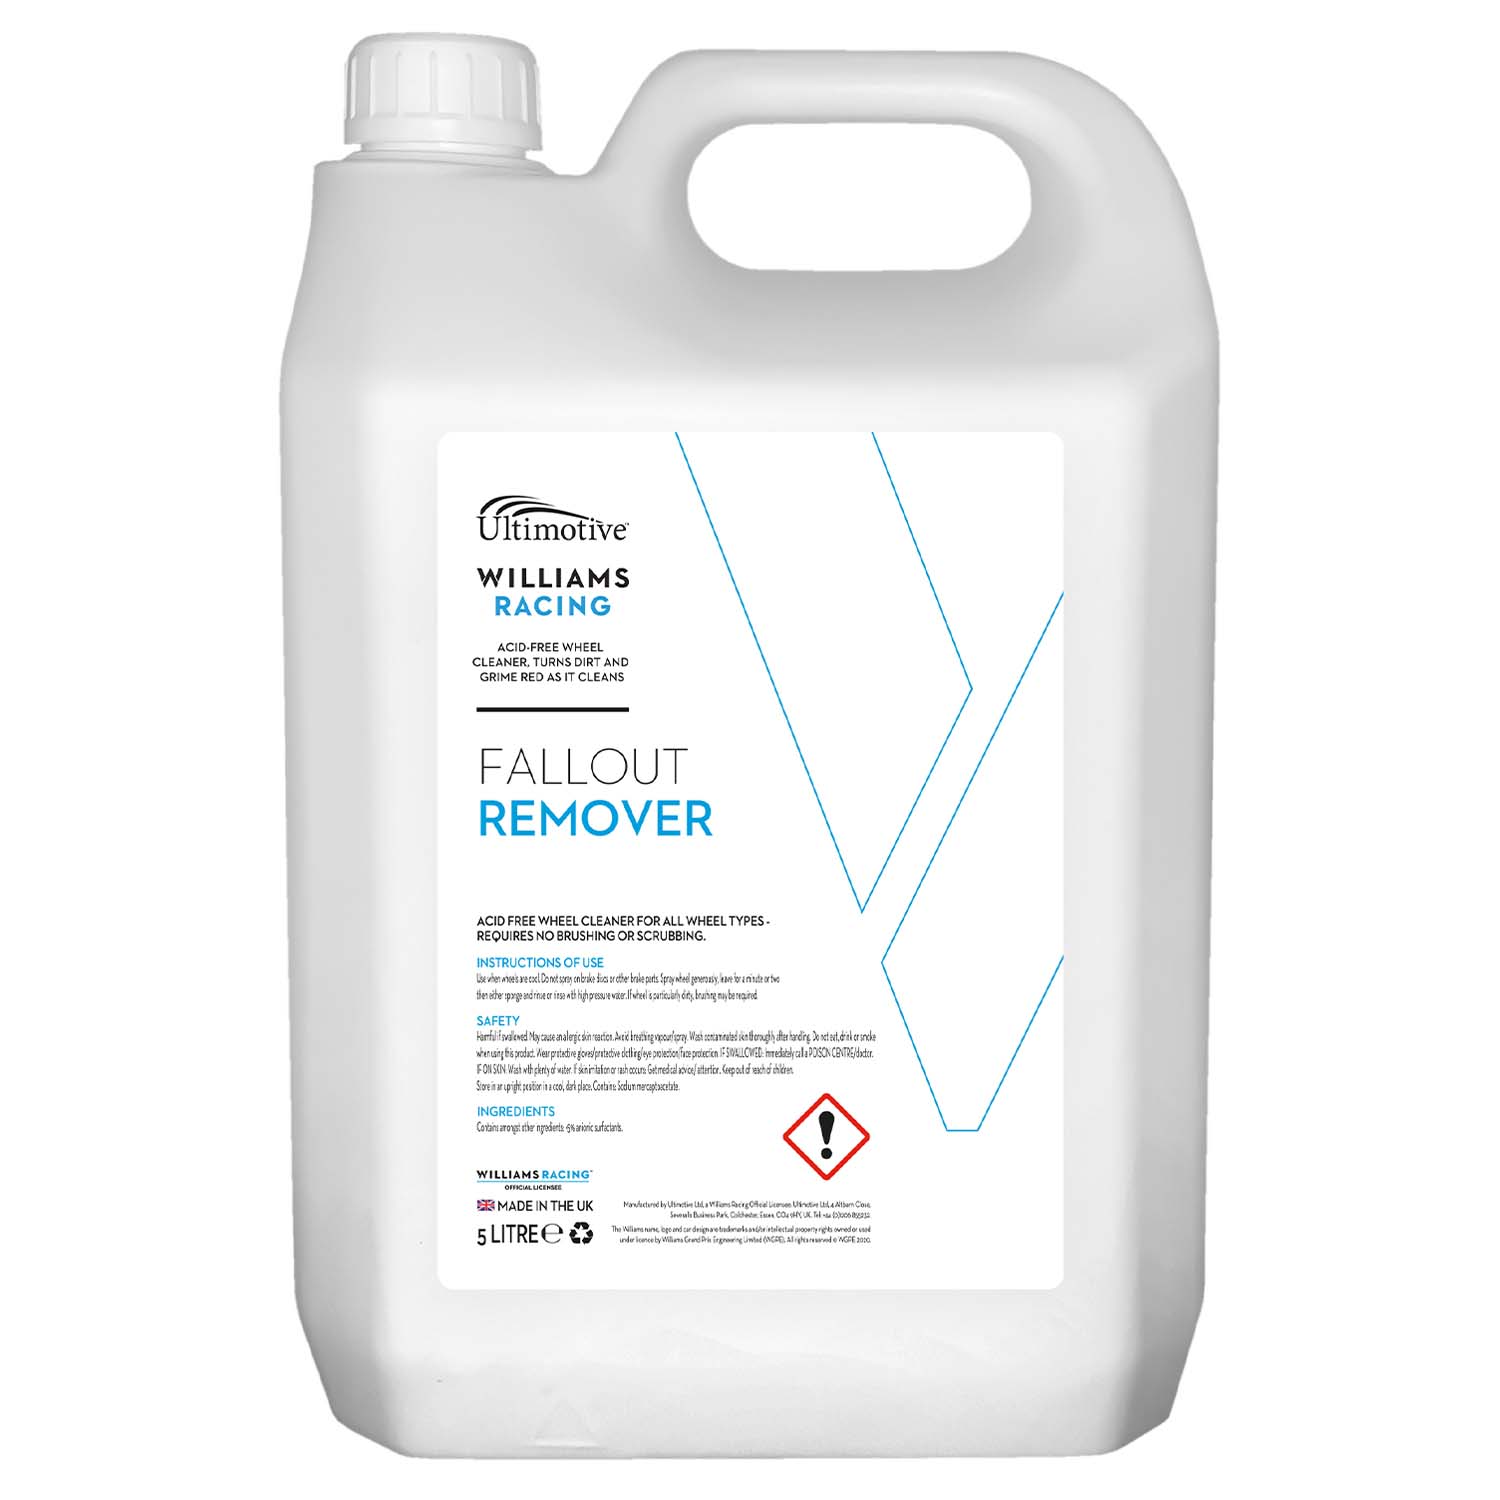 Williams Racing Fallout Remover 5L